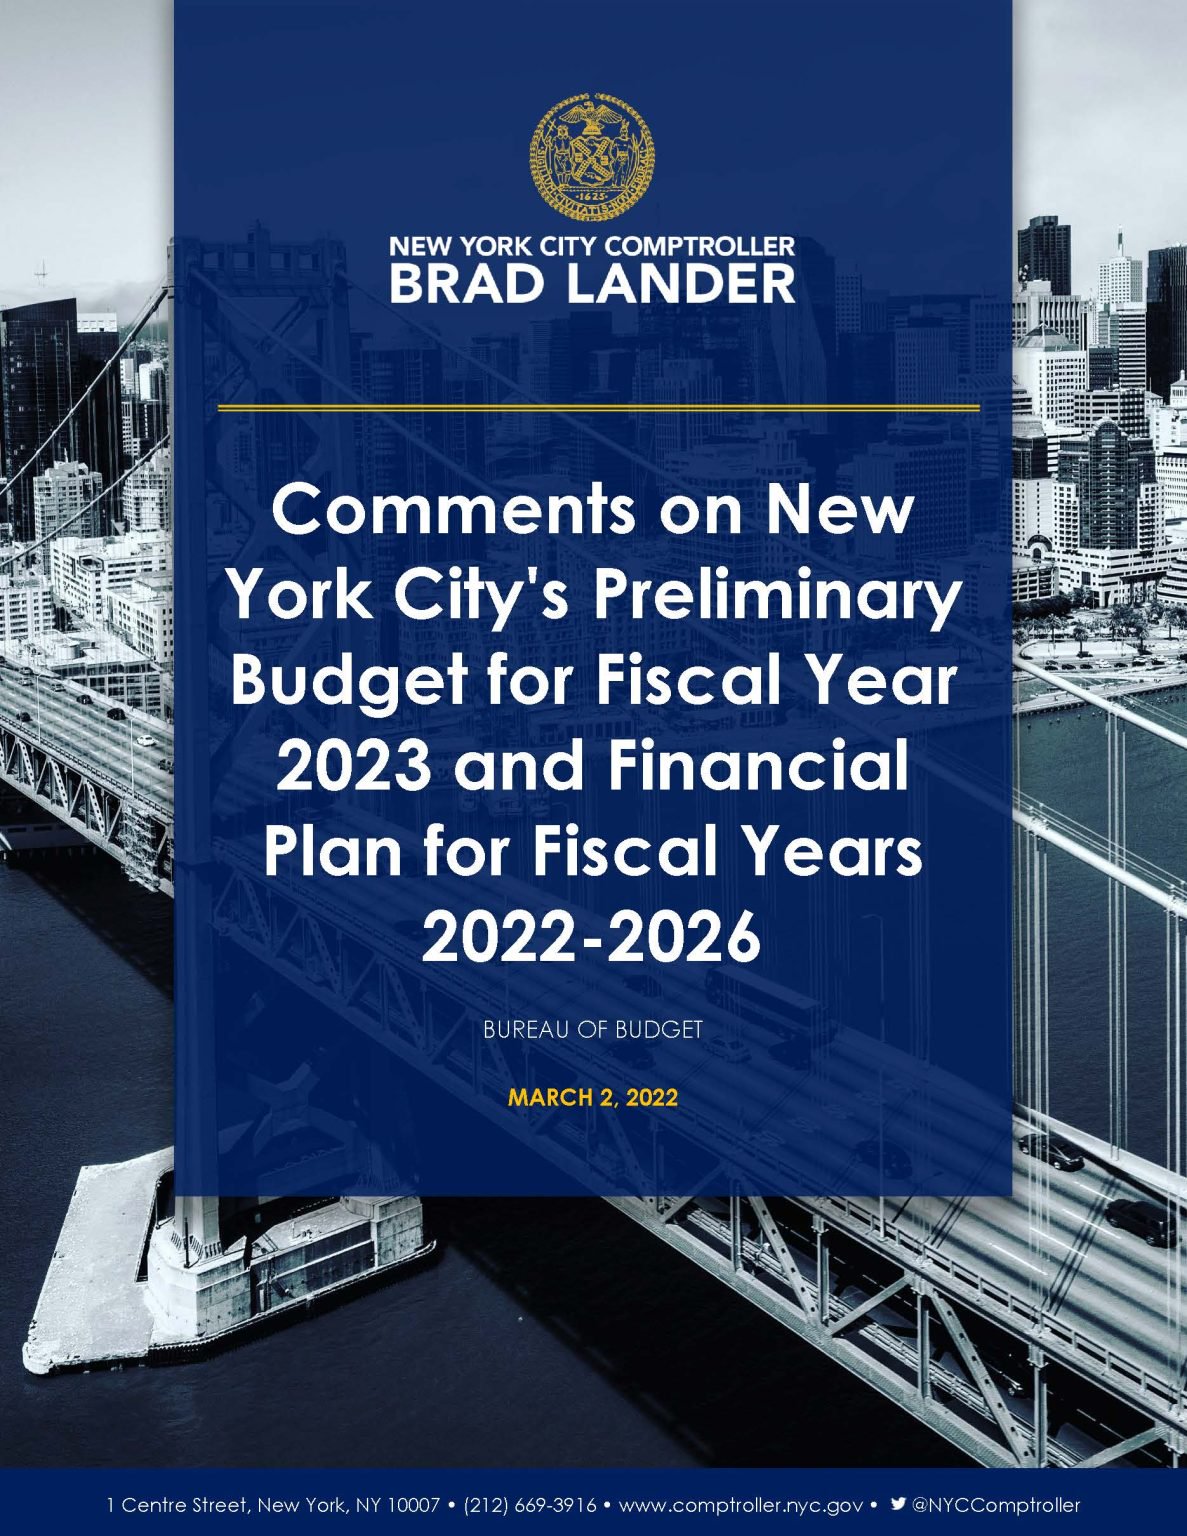 Comments on New York City’s Preliminary Budget for Fiscal Year 2023 and